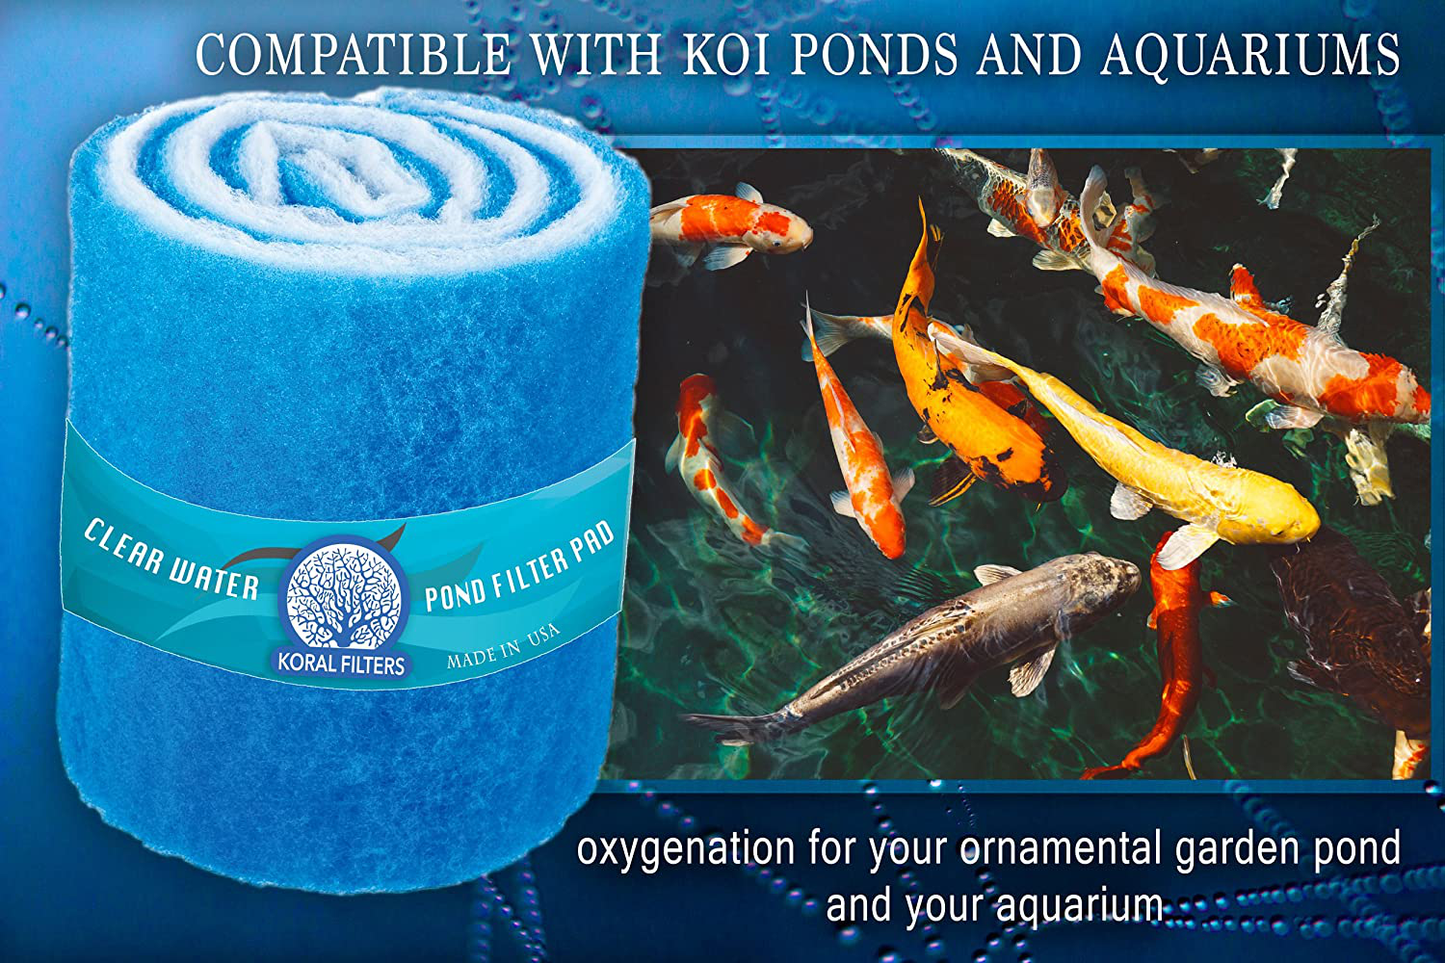 Koral Filters PRO Koi Pond Filter Pad Media Roll - Blue Bonded - 12 Inches by 72 Inches (6 Ft) by 1.25 Inches - Cut to Fit - Durable - Fish and Reef Aquarium Compatible Animals & Pet Supplies > Pet Supplies > Fish Supplies > Aquarium Filters Koral Filters   